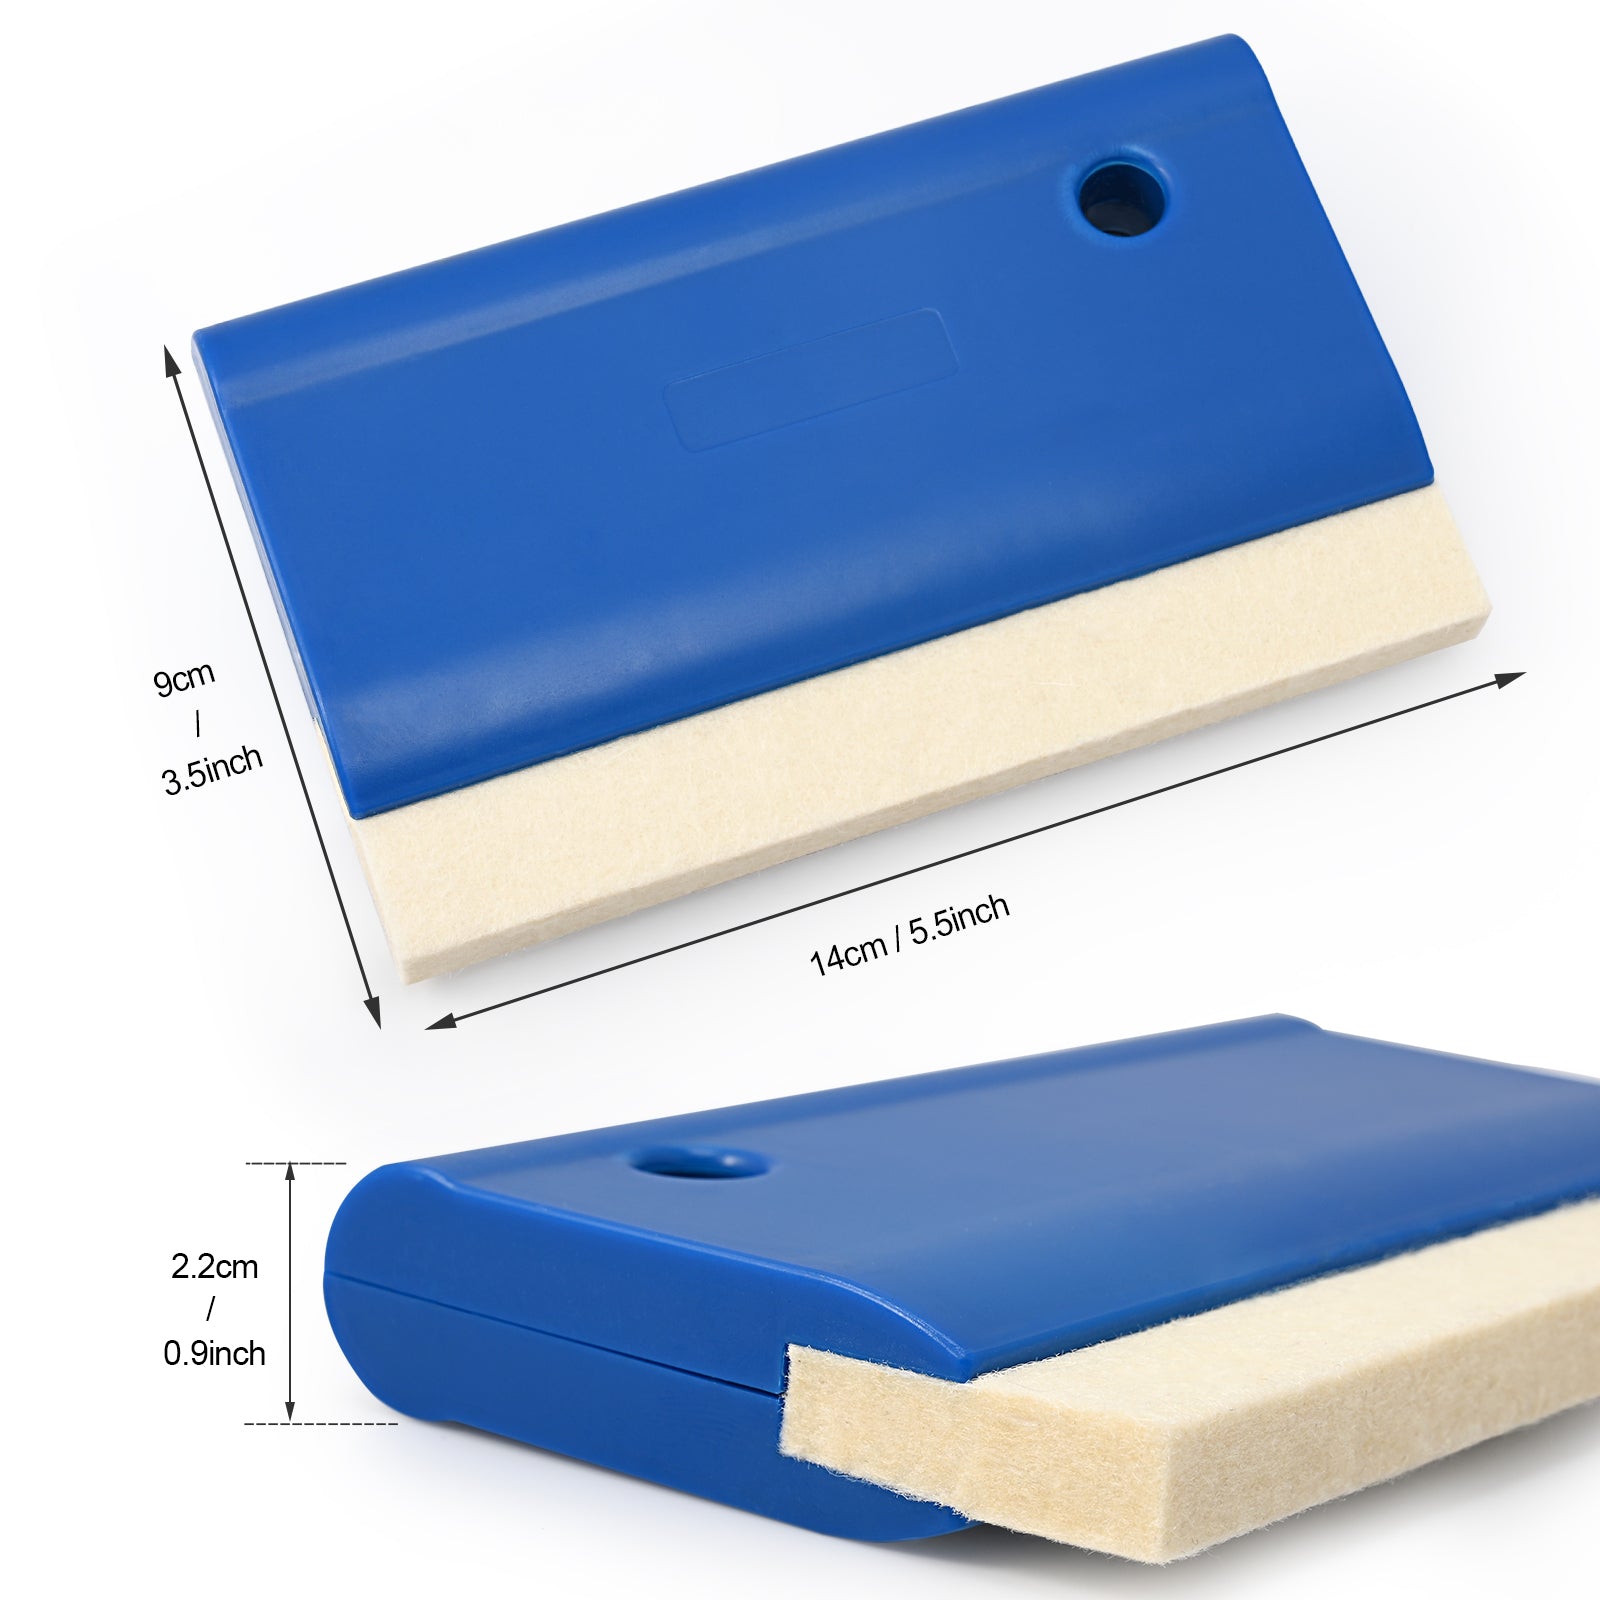 Rubber Application Squeegee 2x3 Vinyl Squeegee Wet or Dry Squeegee